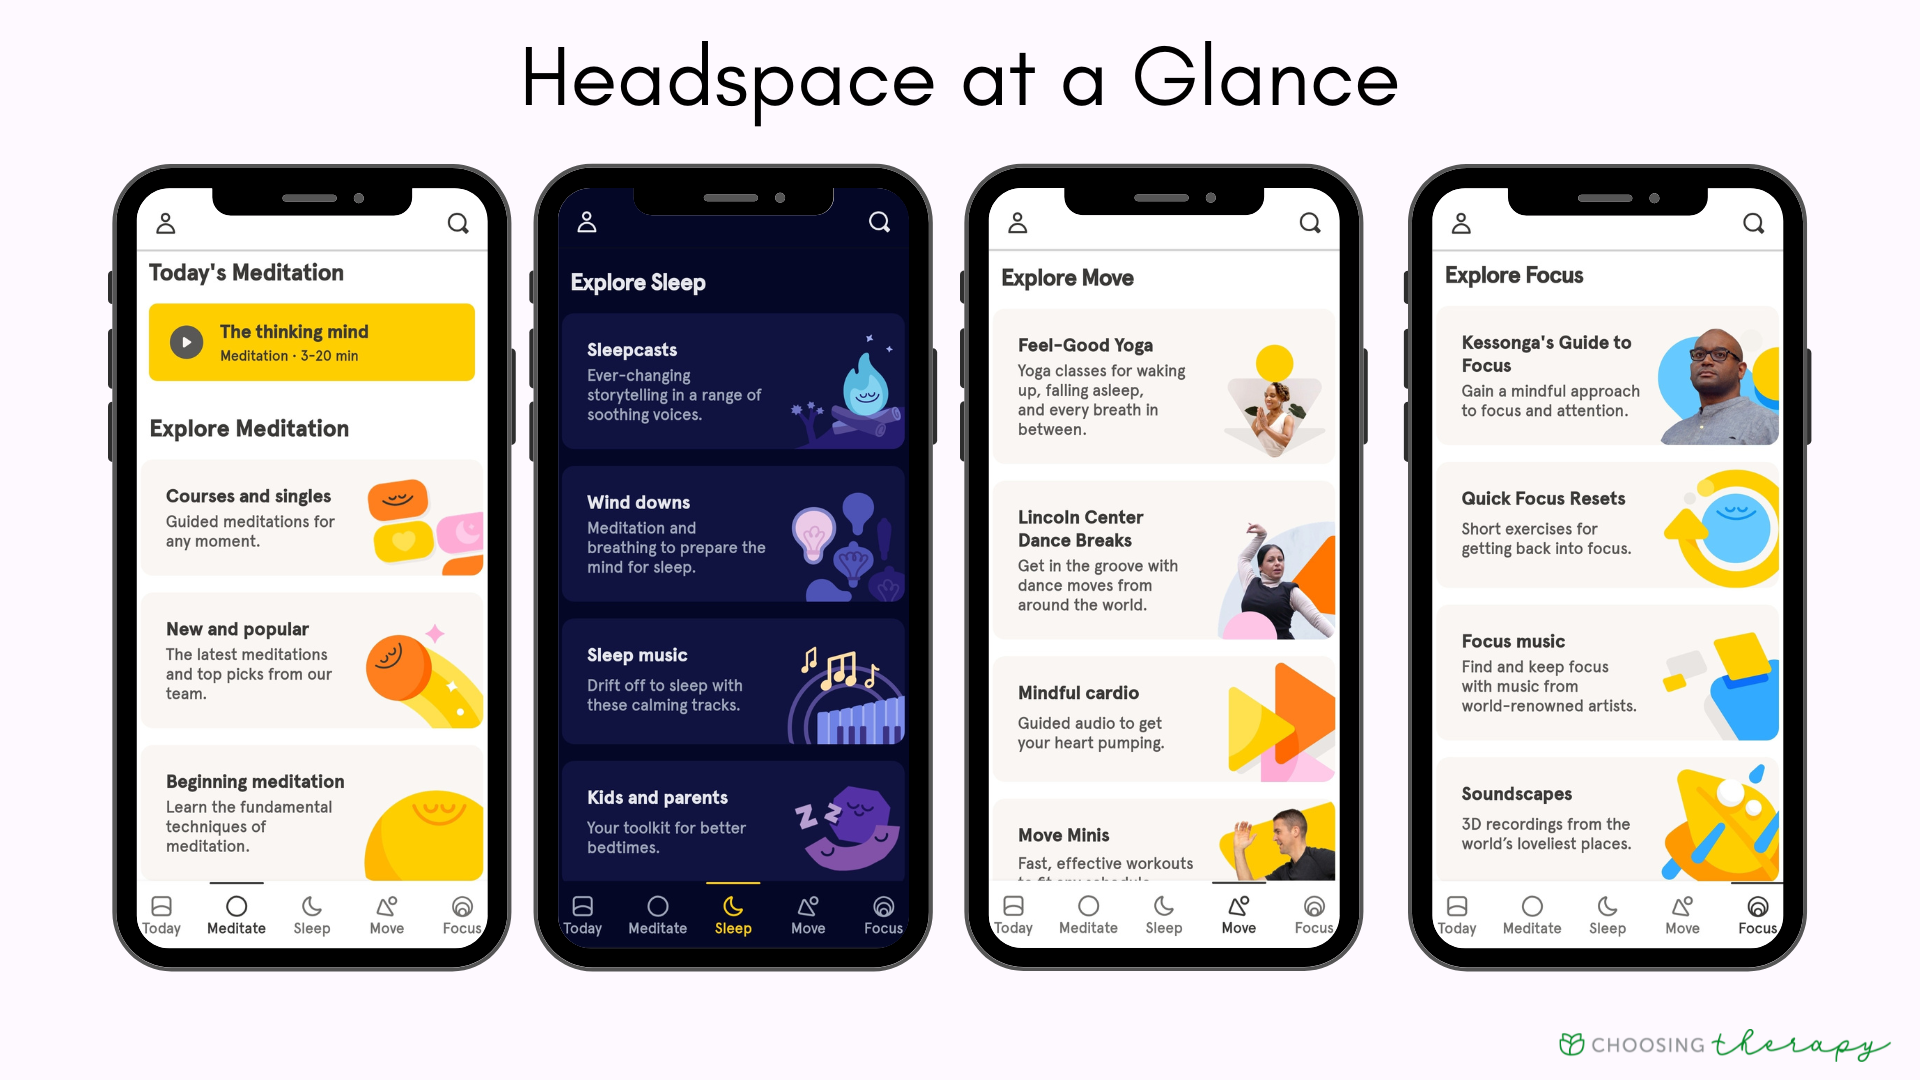 Headspace App Review 2022 - Image of the key features of the Headspace app, daily meditations, sleep meditations, exercise section, and focus meditations